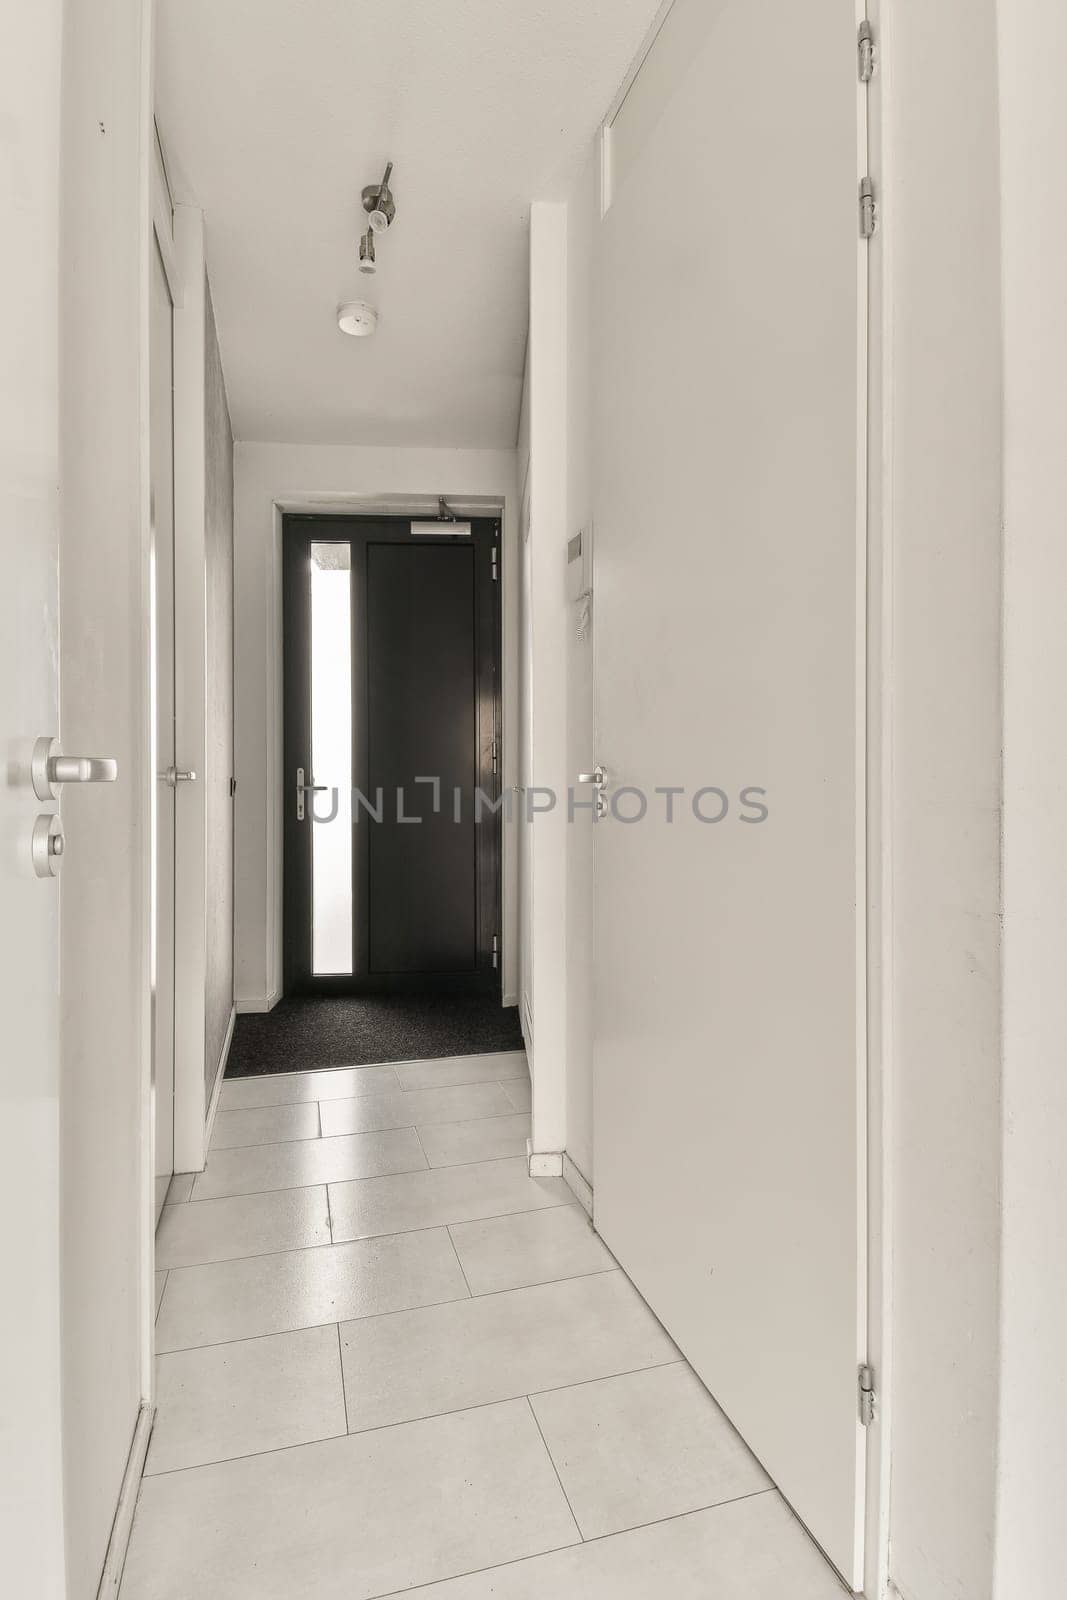 a long hallway with white walls and black door handle on the left side of the room, there is an open door